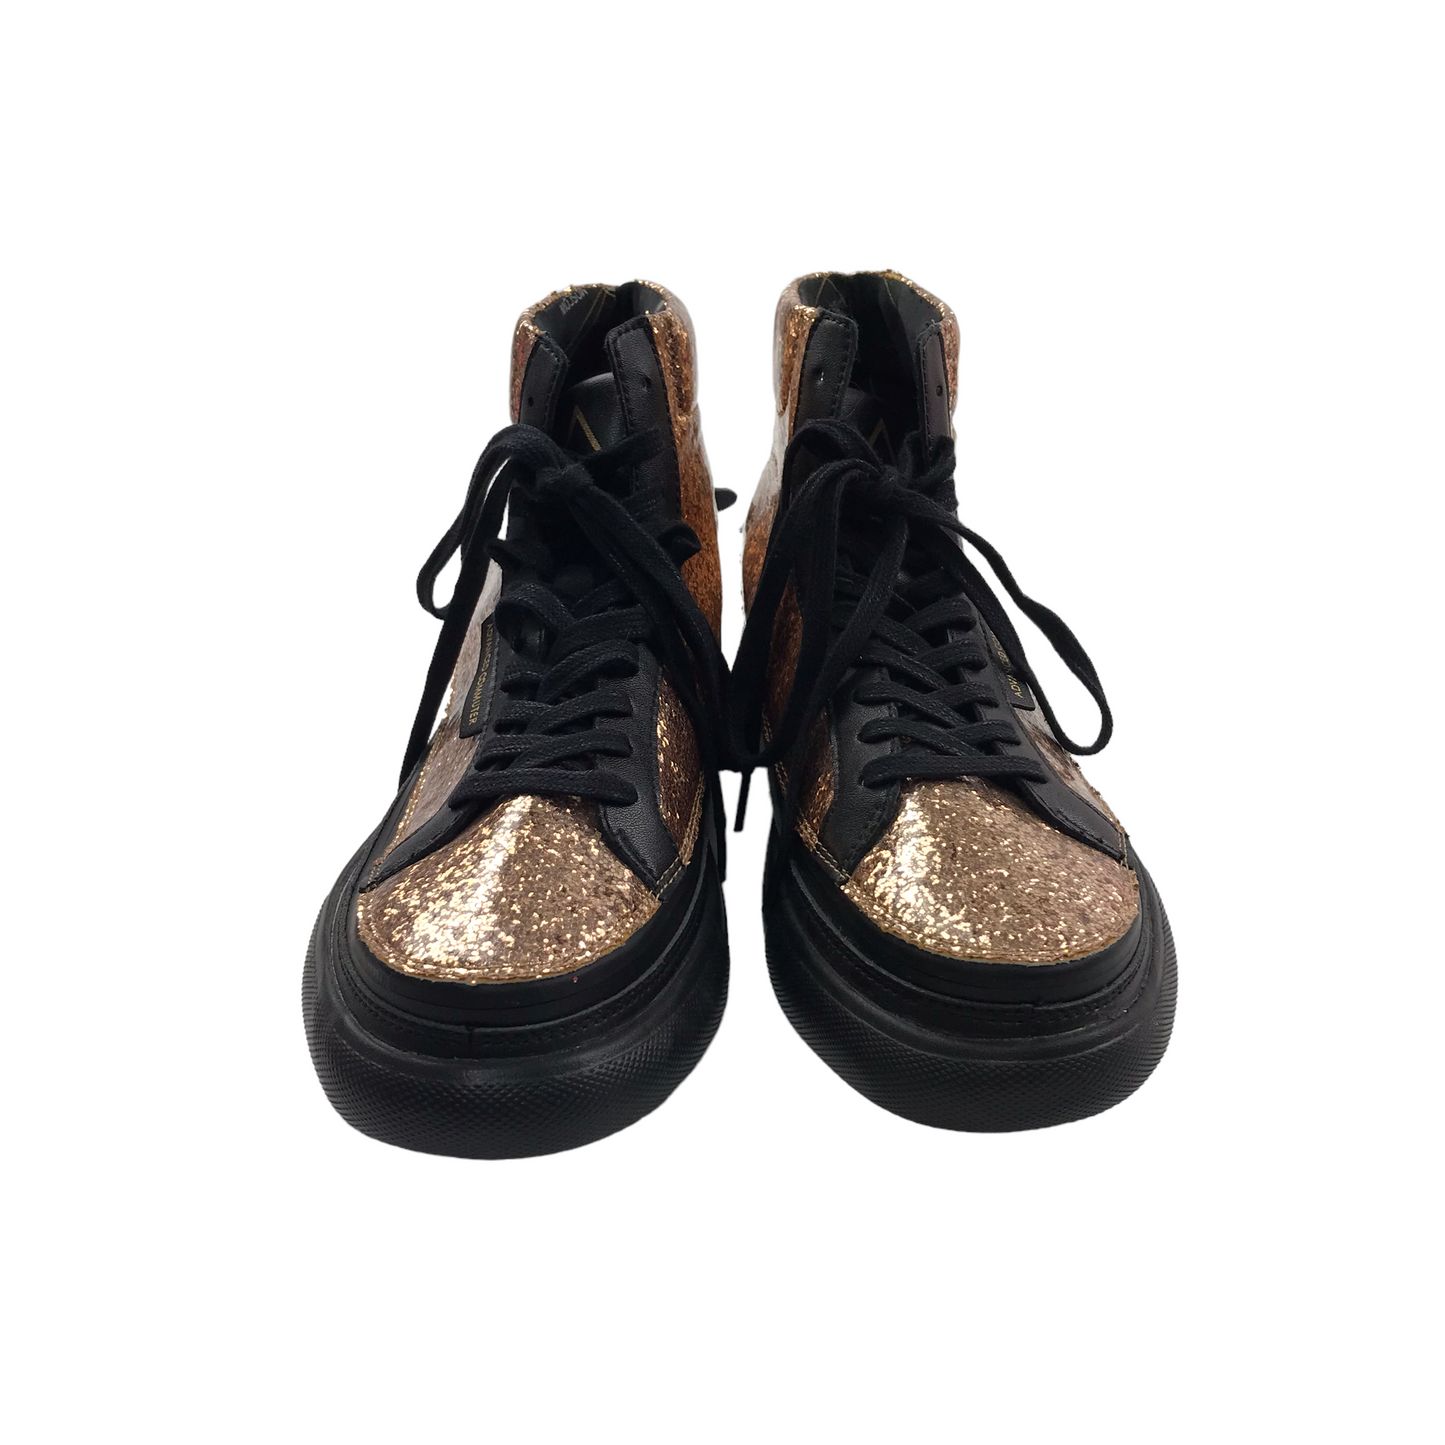 ACBC Golden Sparkly Modular High Tops Trainers Shoe Size 3